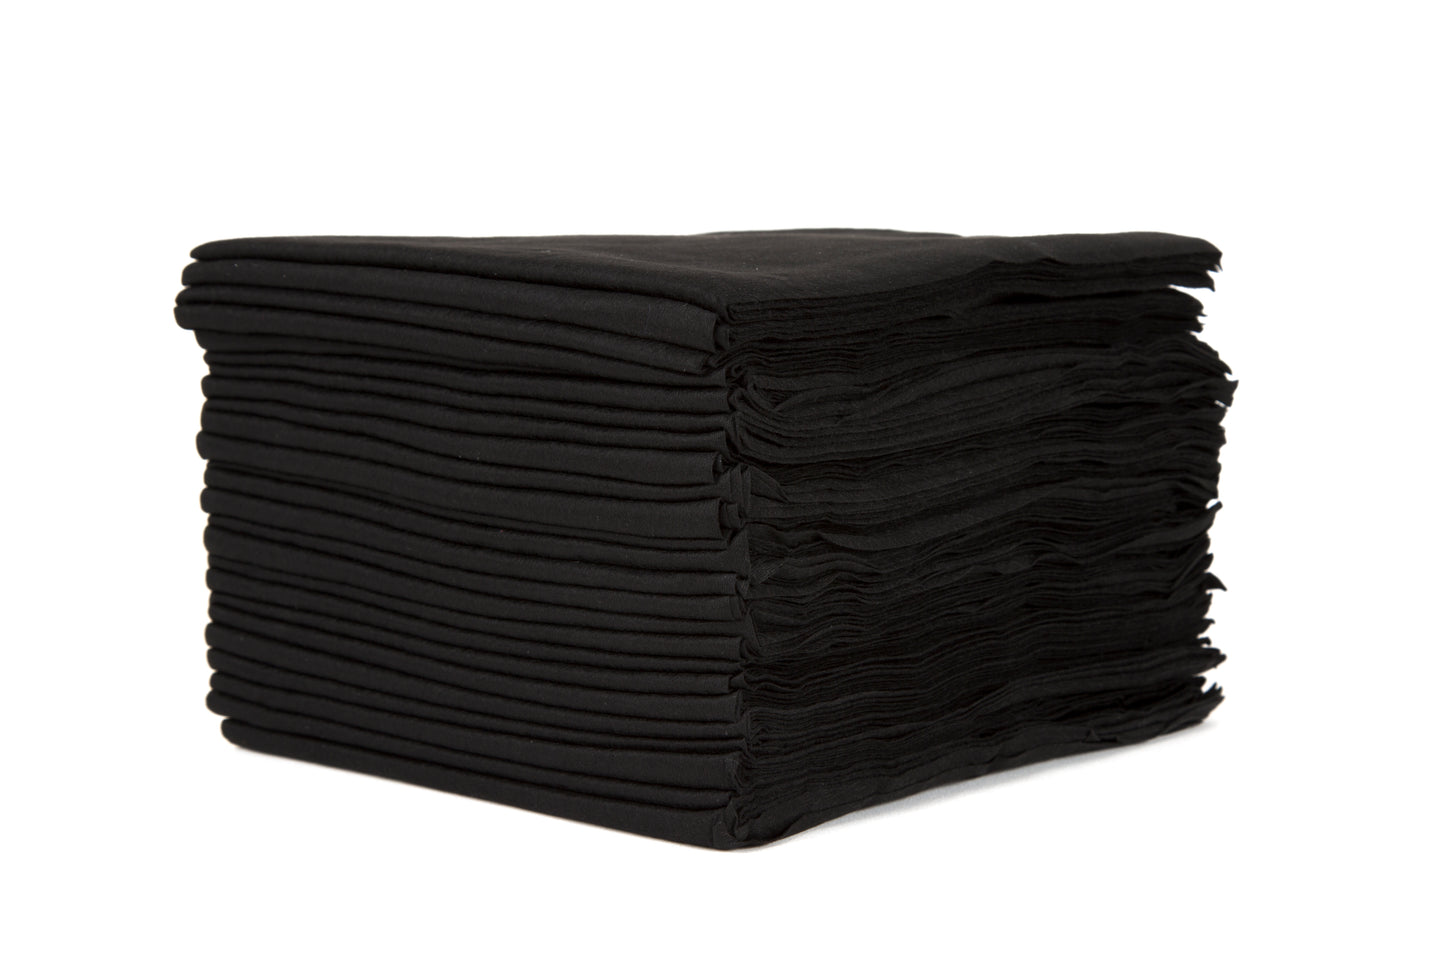 Nonwoven Disposable Towel Black Pack 50 - Case of 12